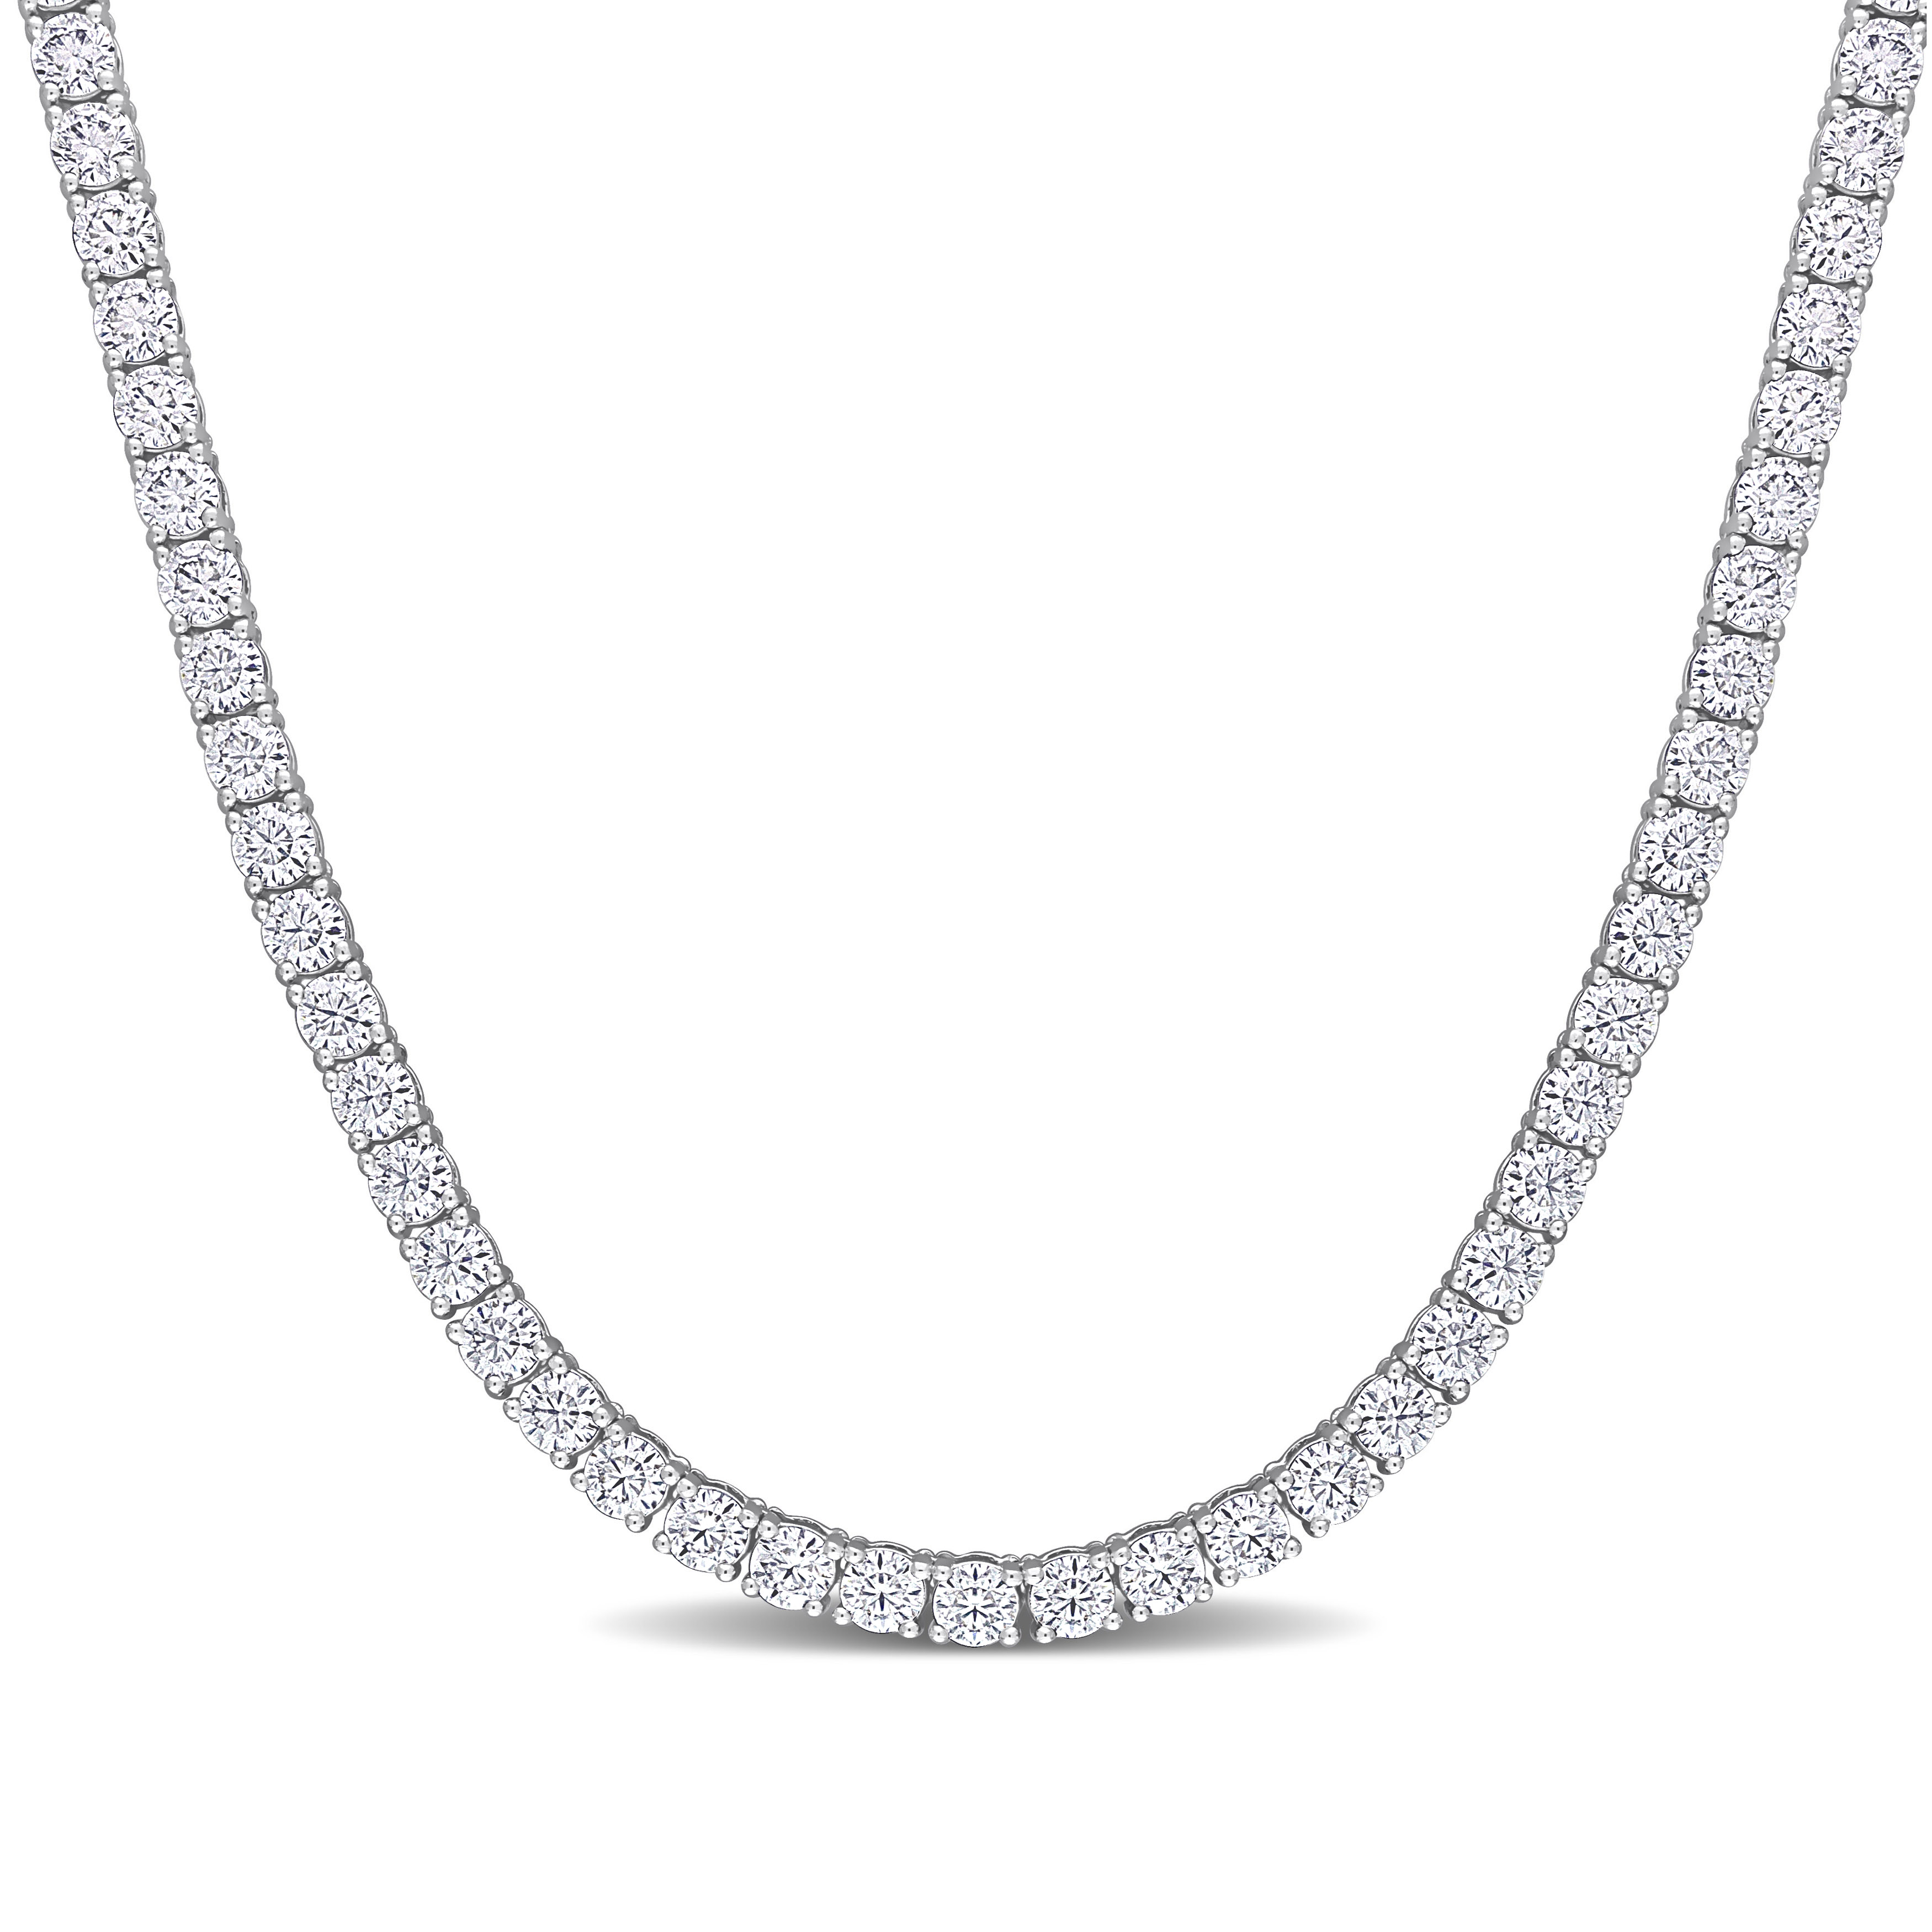 16 7/8 CT DEW Created Moissanite Tennis Necklace in 18k White Gold - 17 in.